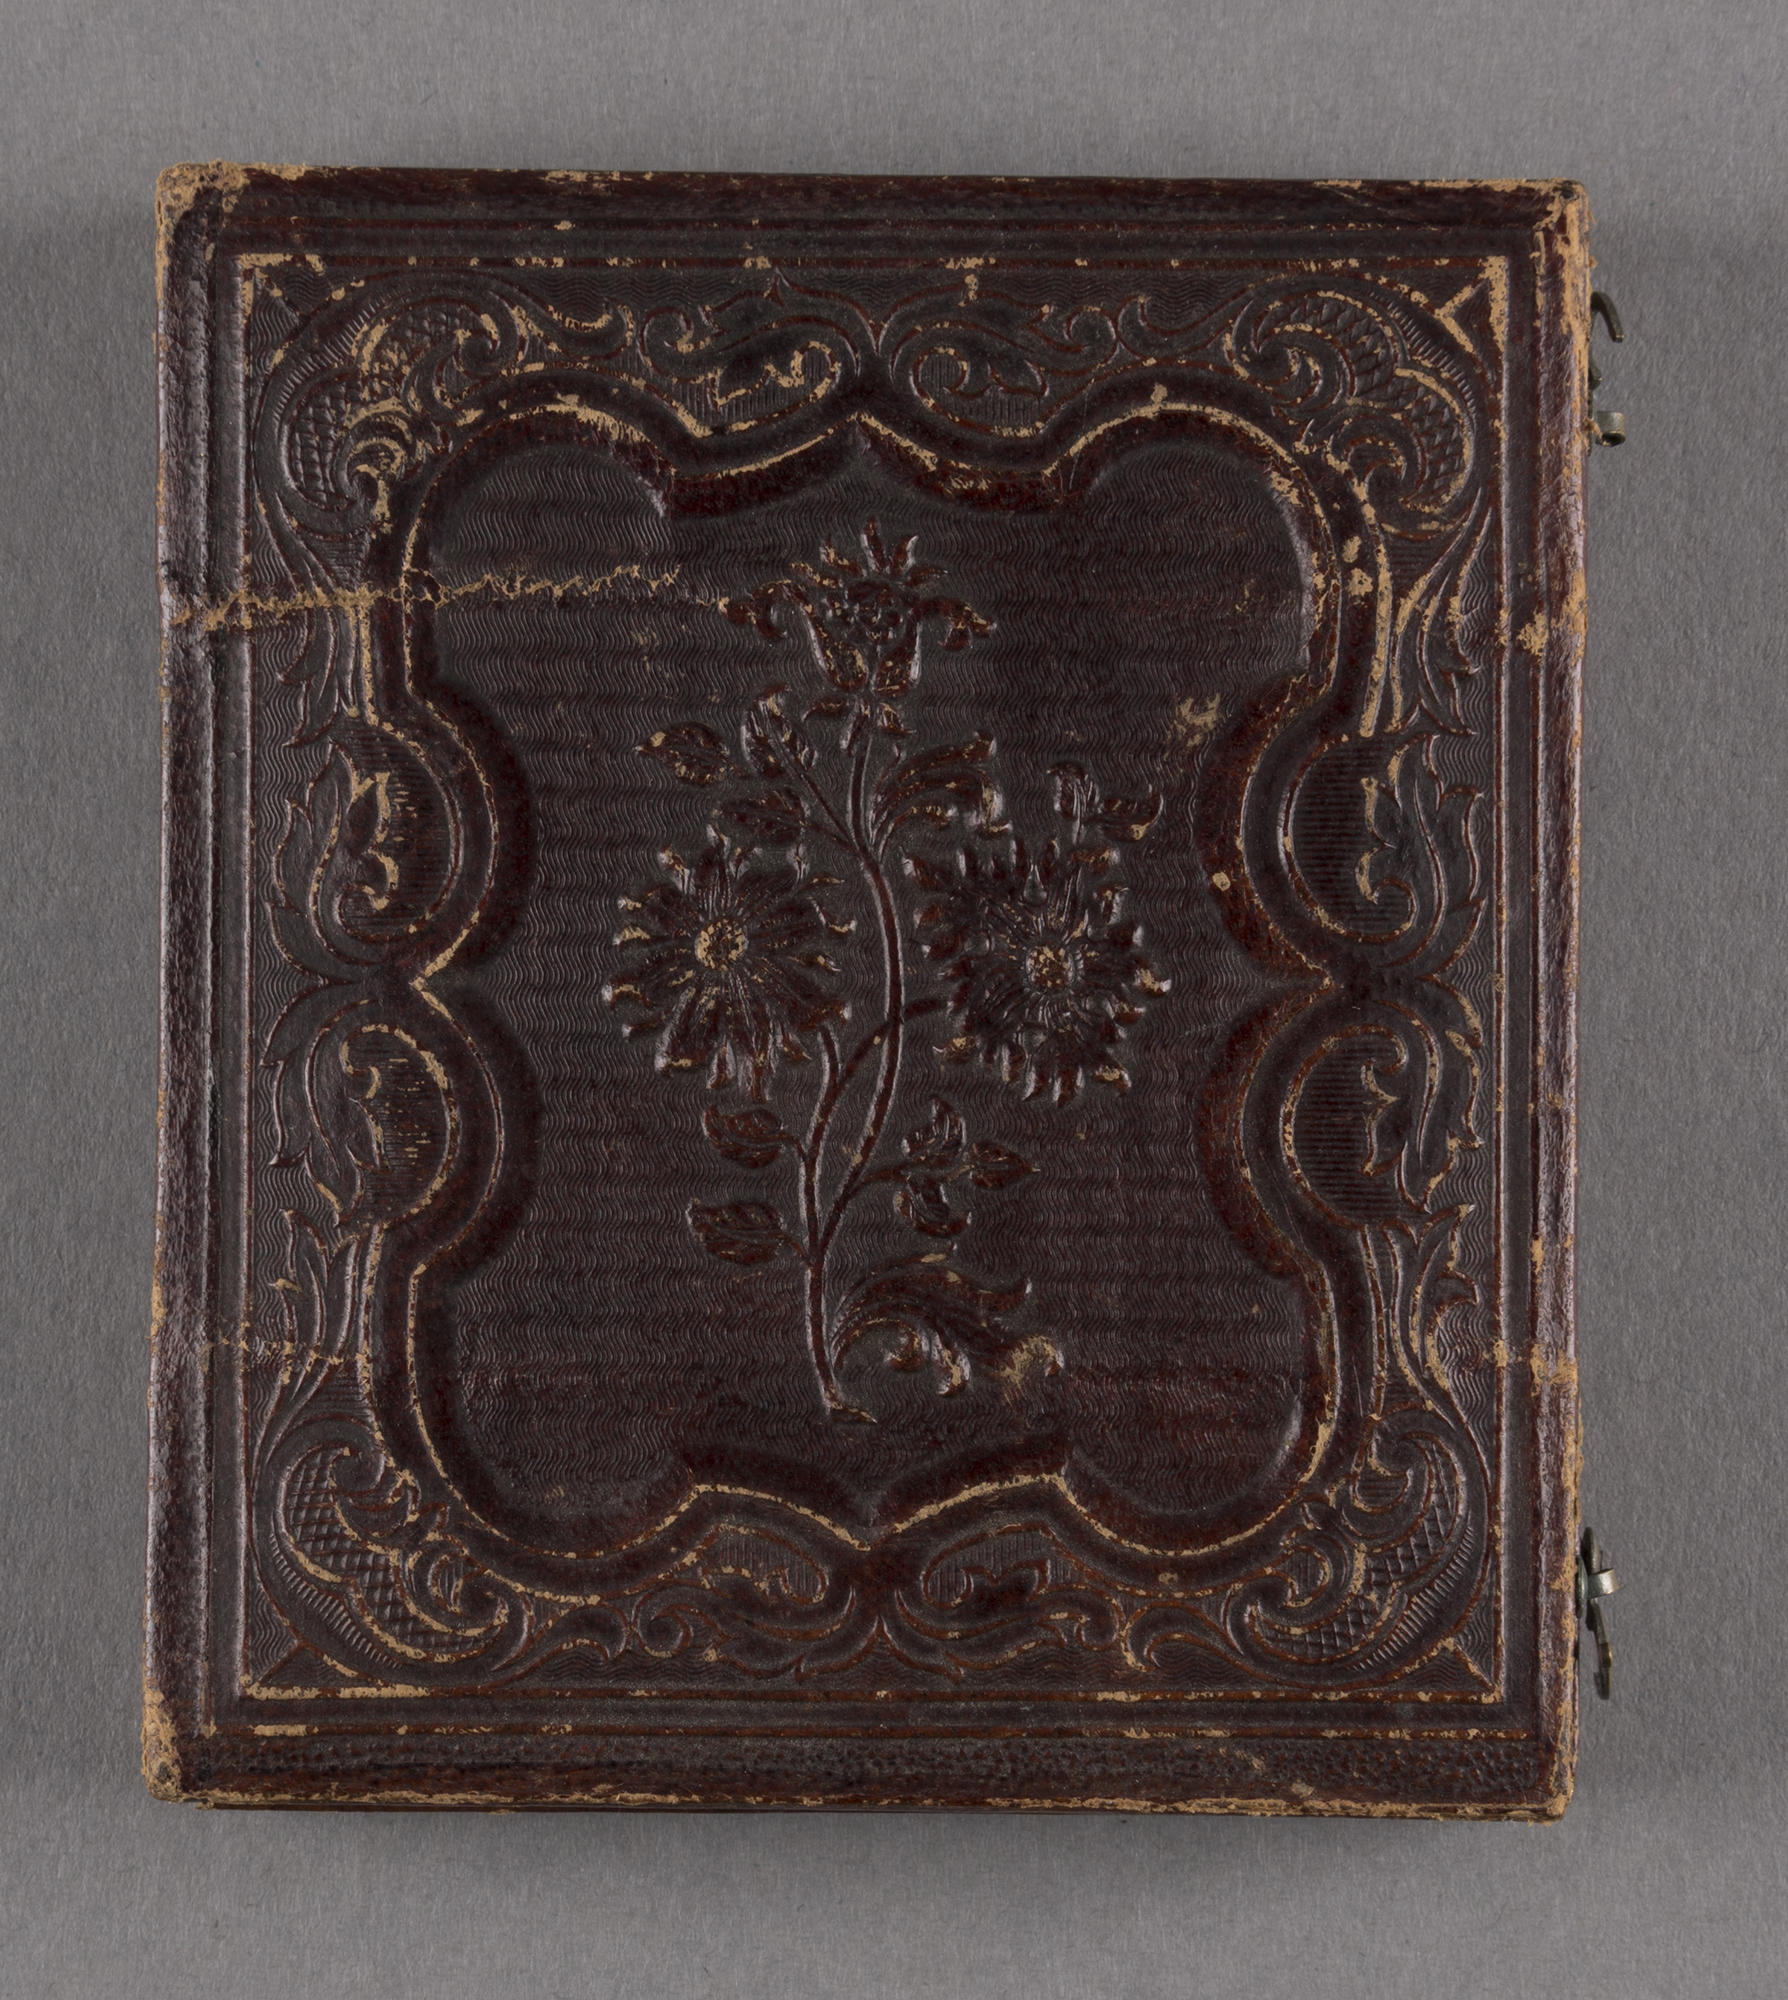 The outside of the embossed brown leather case of the daguerreotype of John L. Gardner, Sr.